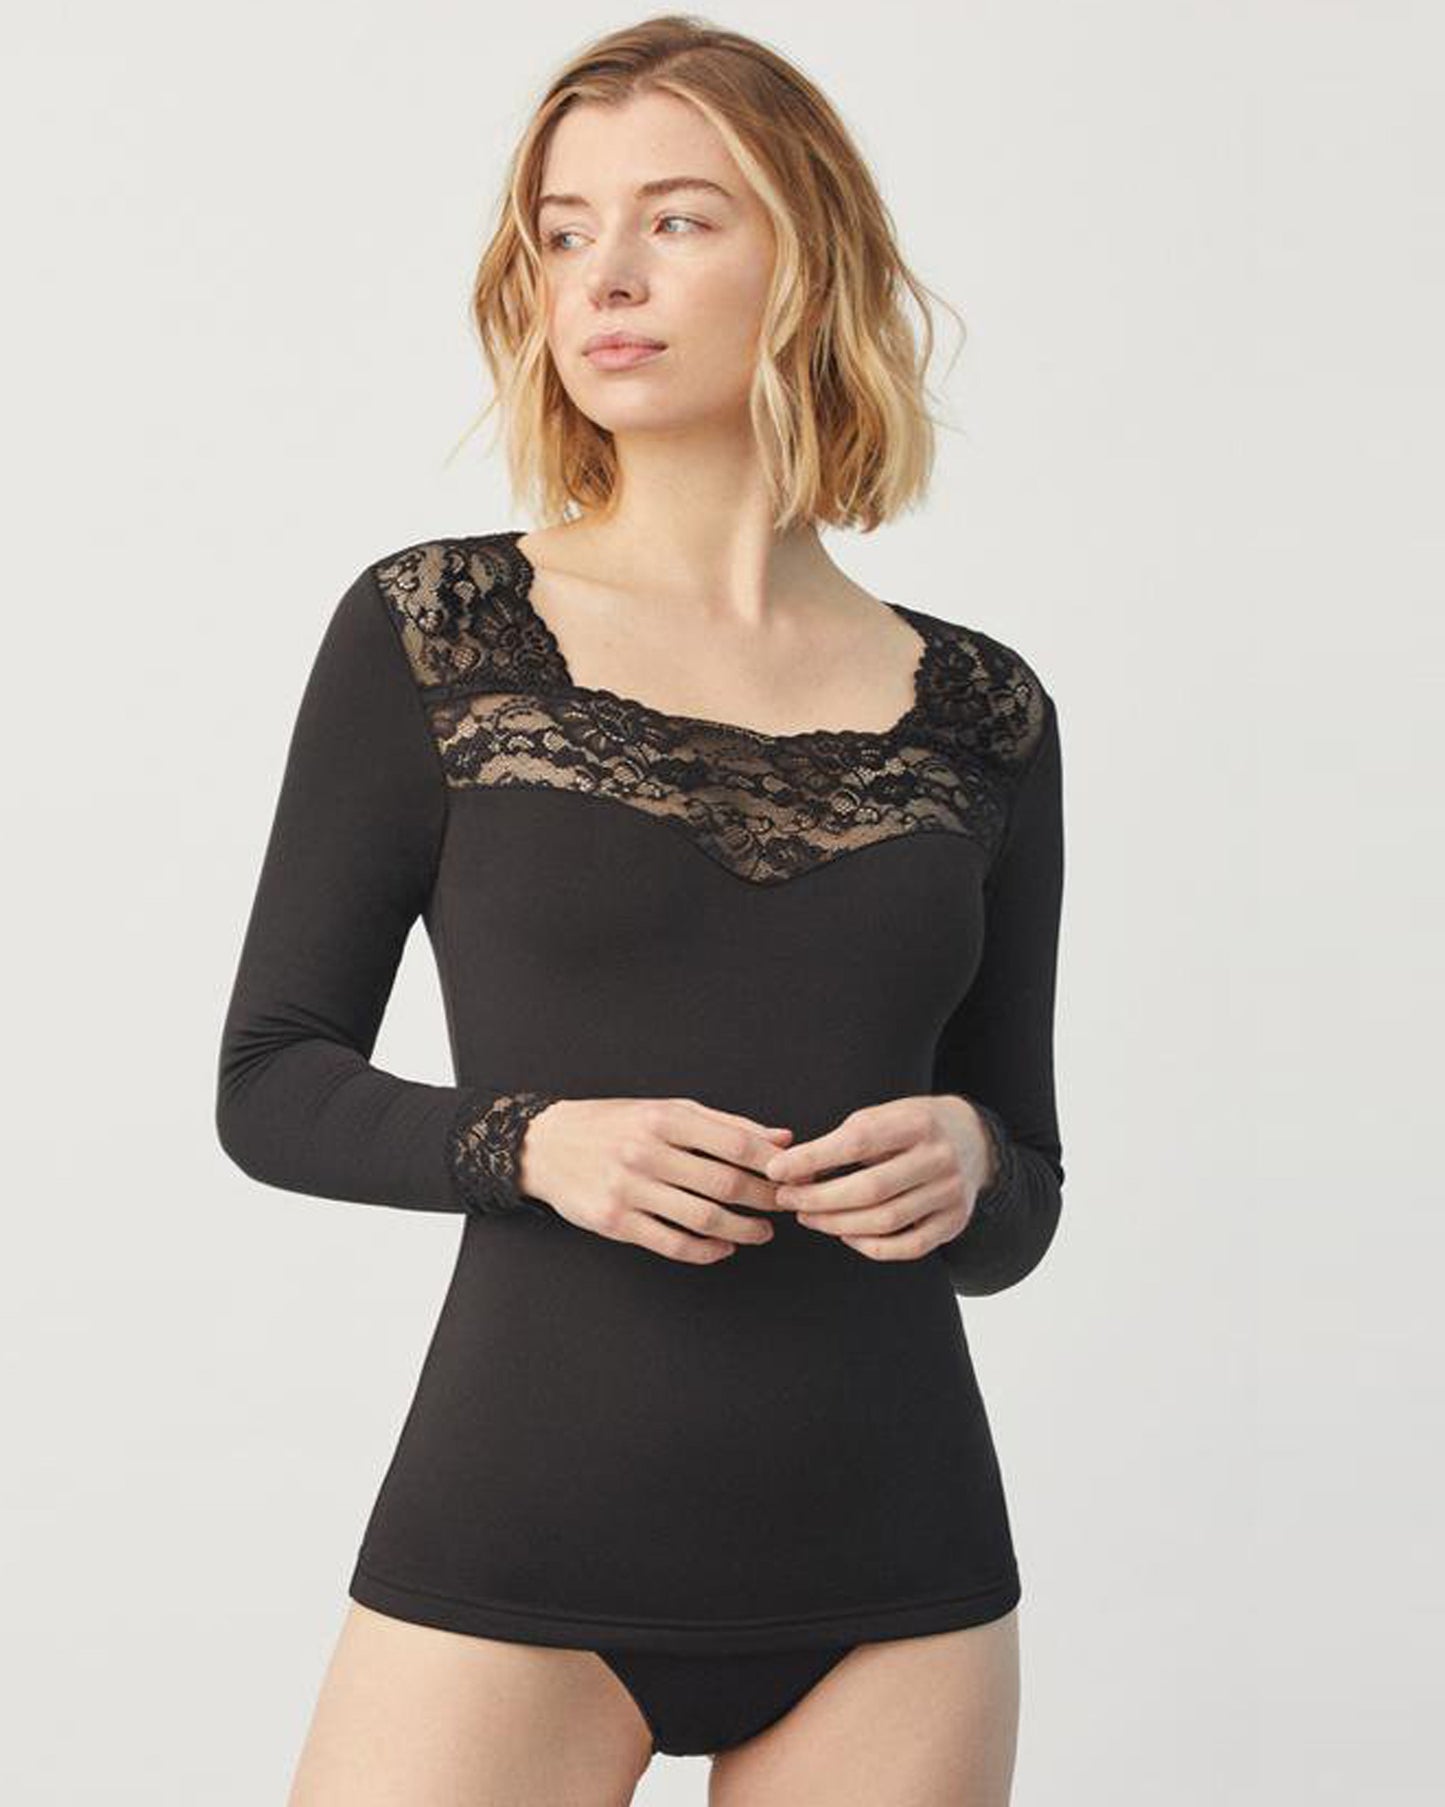 Ysabel Mora 70005 Thermal Lace Top - Black soft and warm fleece lined long sleeved vest with floral lace trim and cuffs.